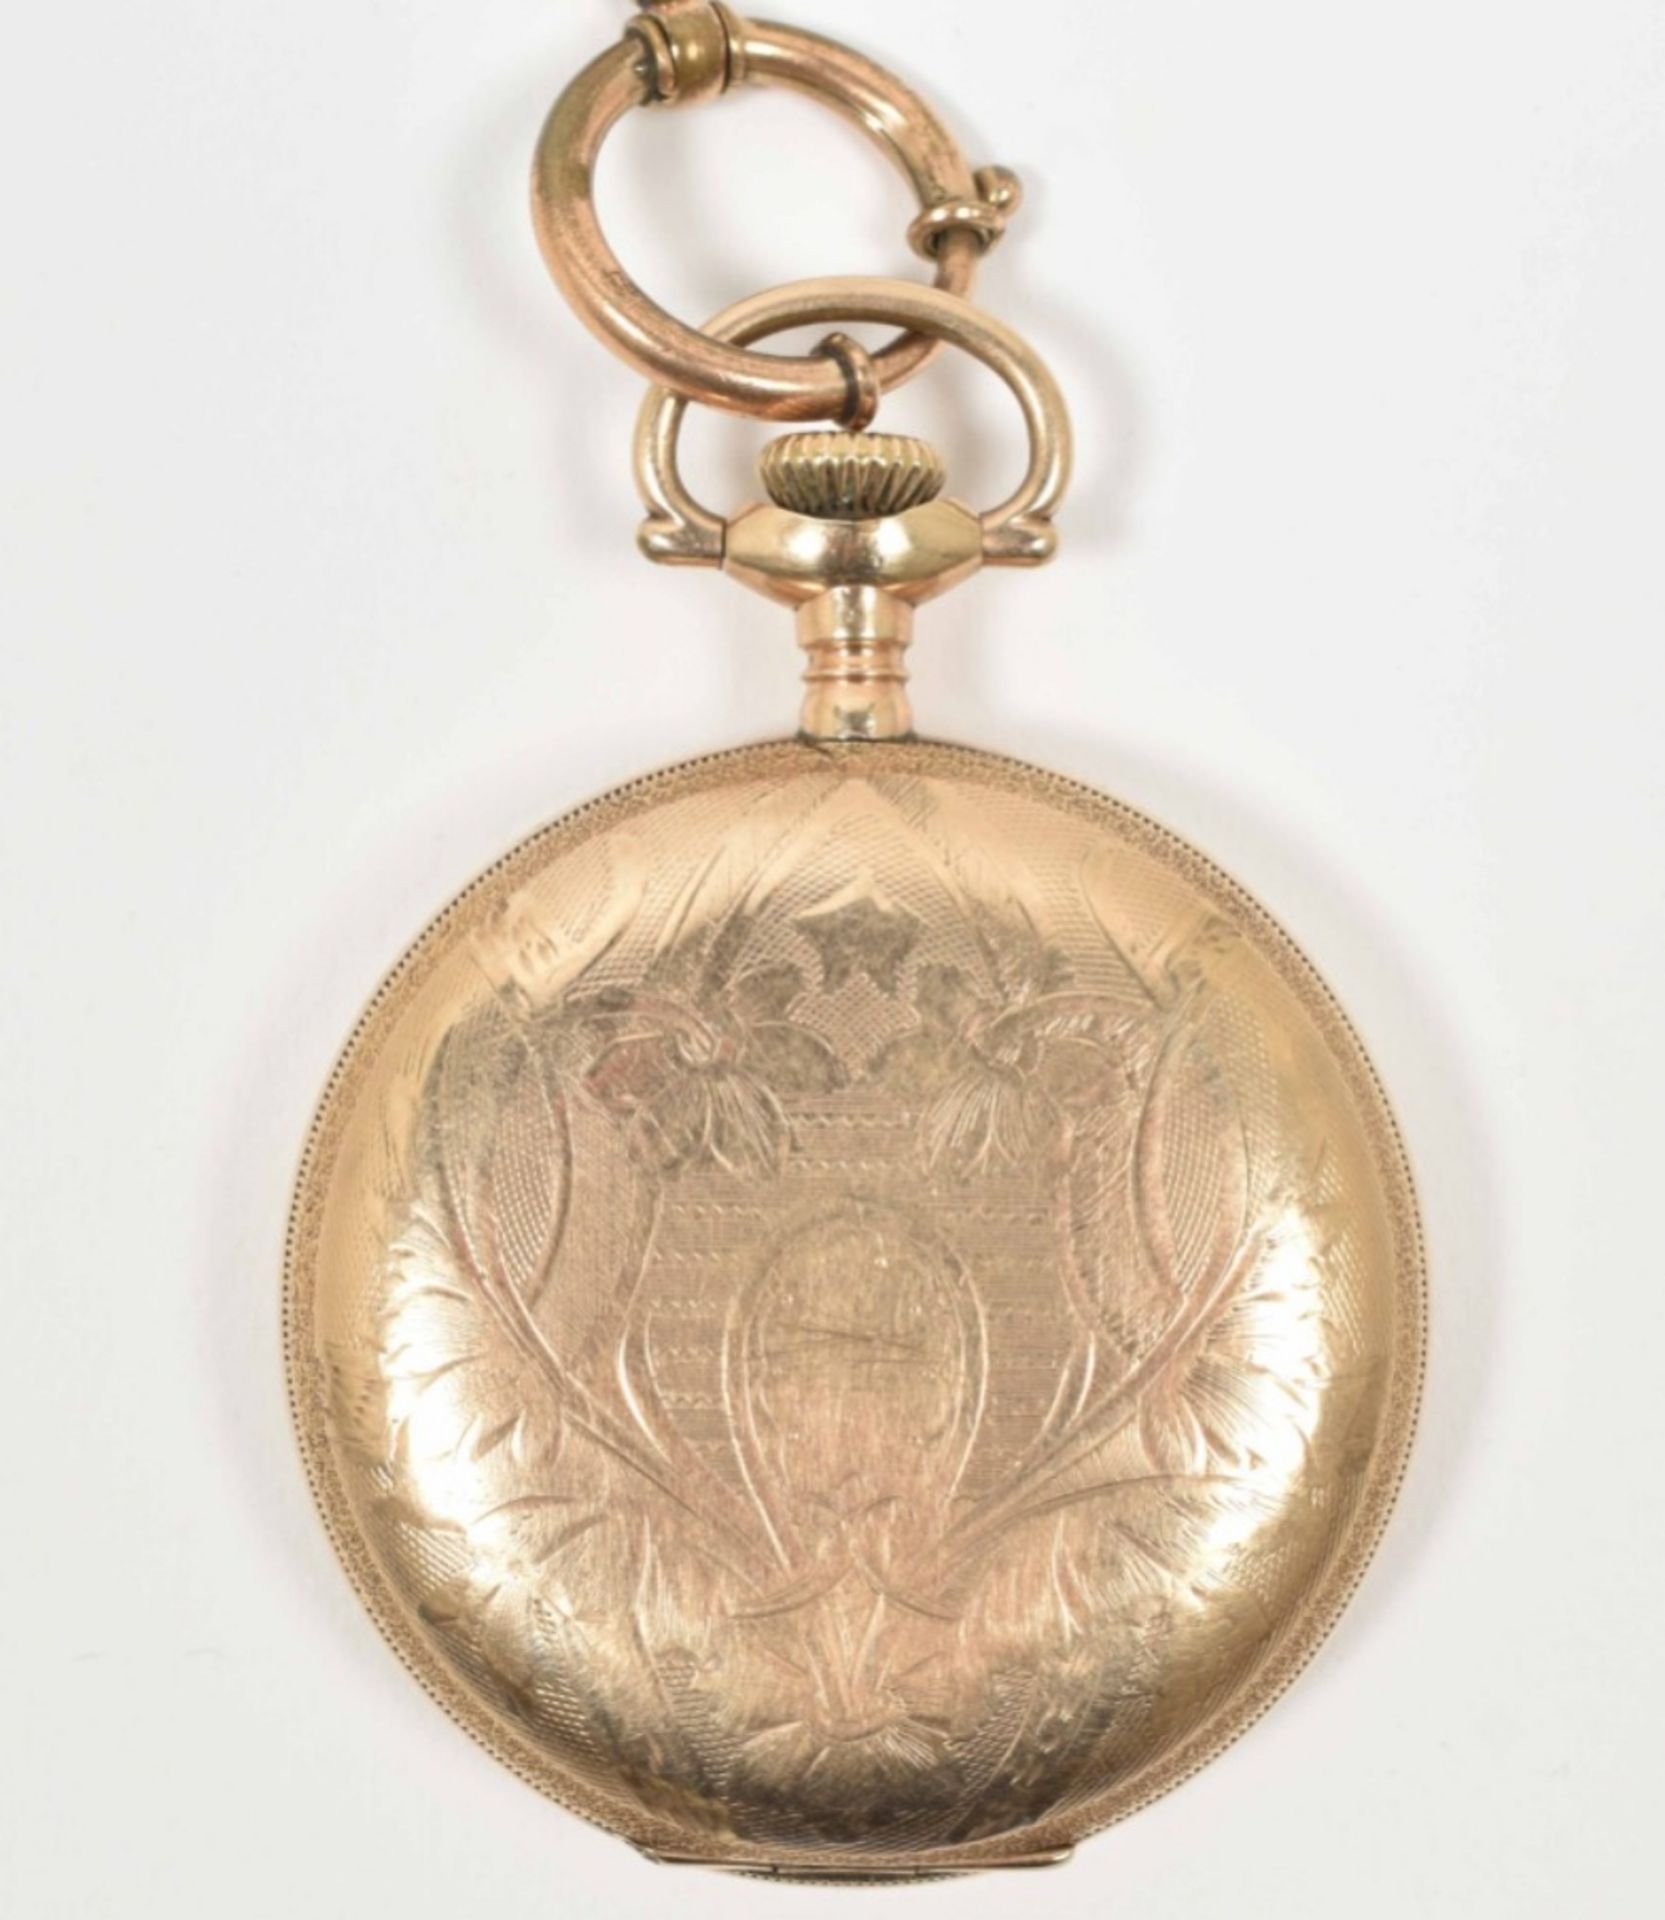 Gold pocket watch - Image 2 of 5